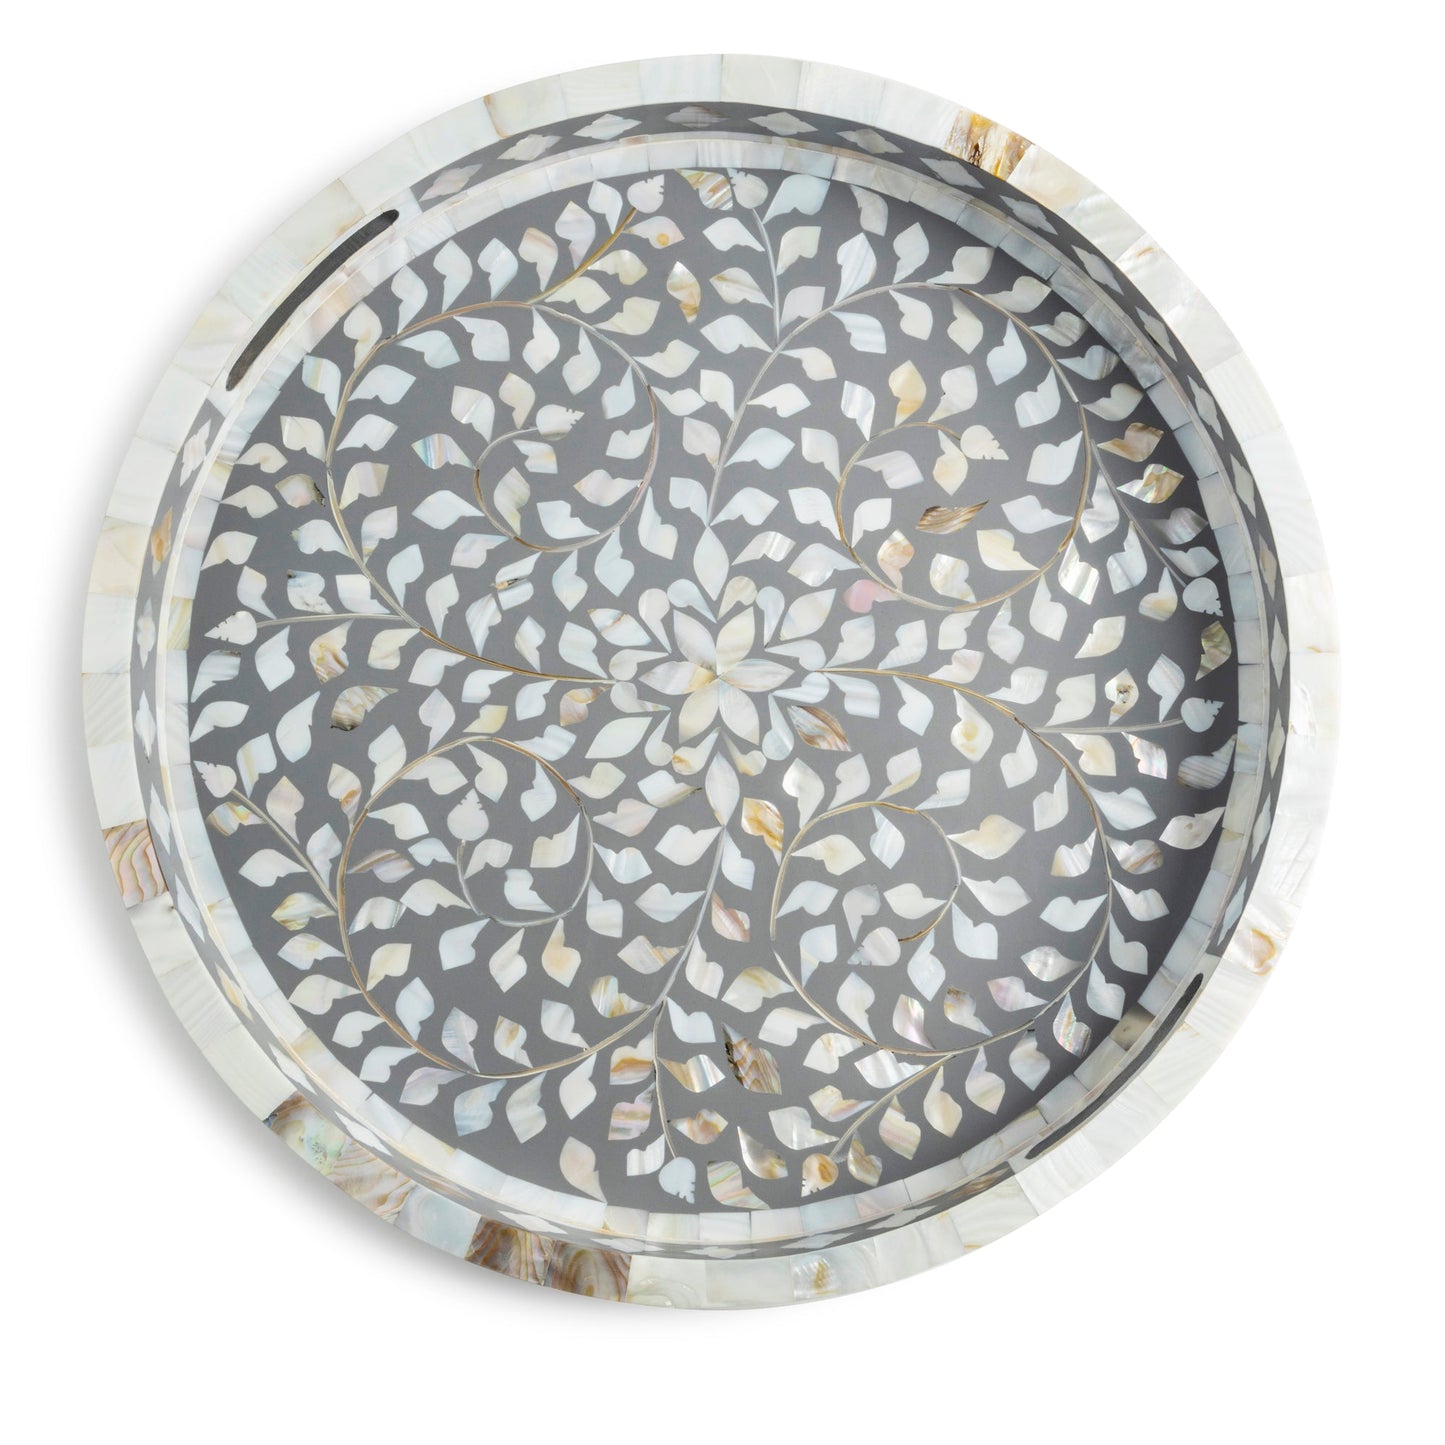 Mother of Pearl Decorative Tray - Grey, 18"